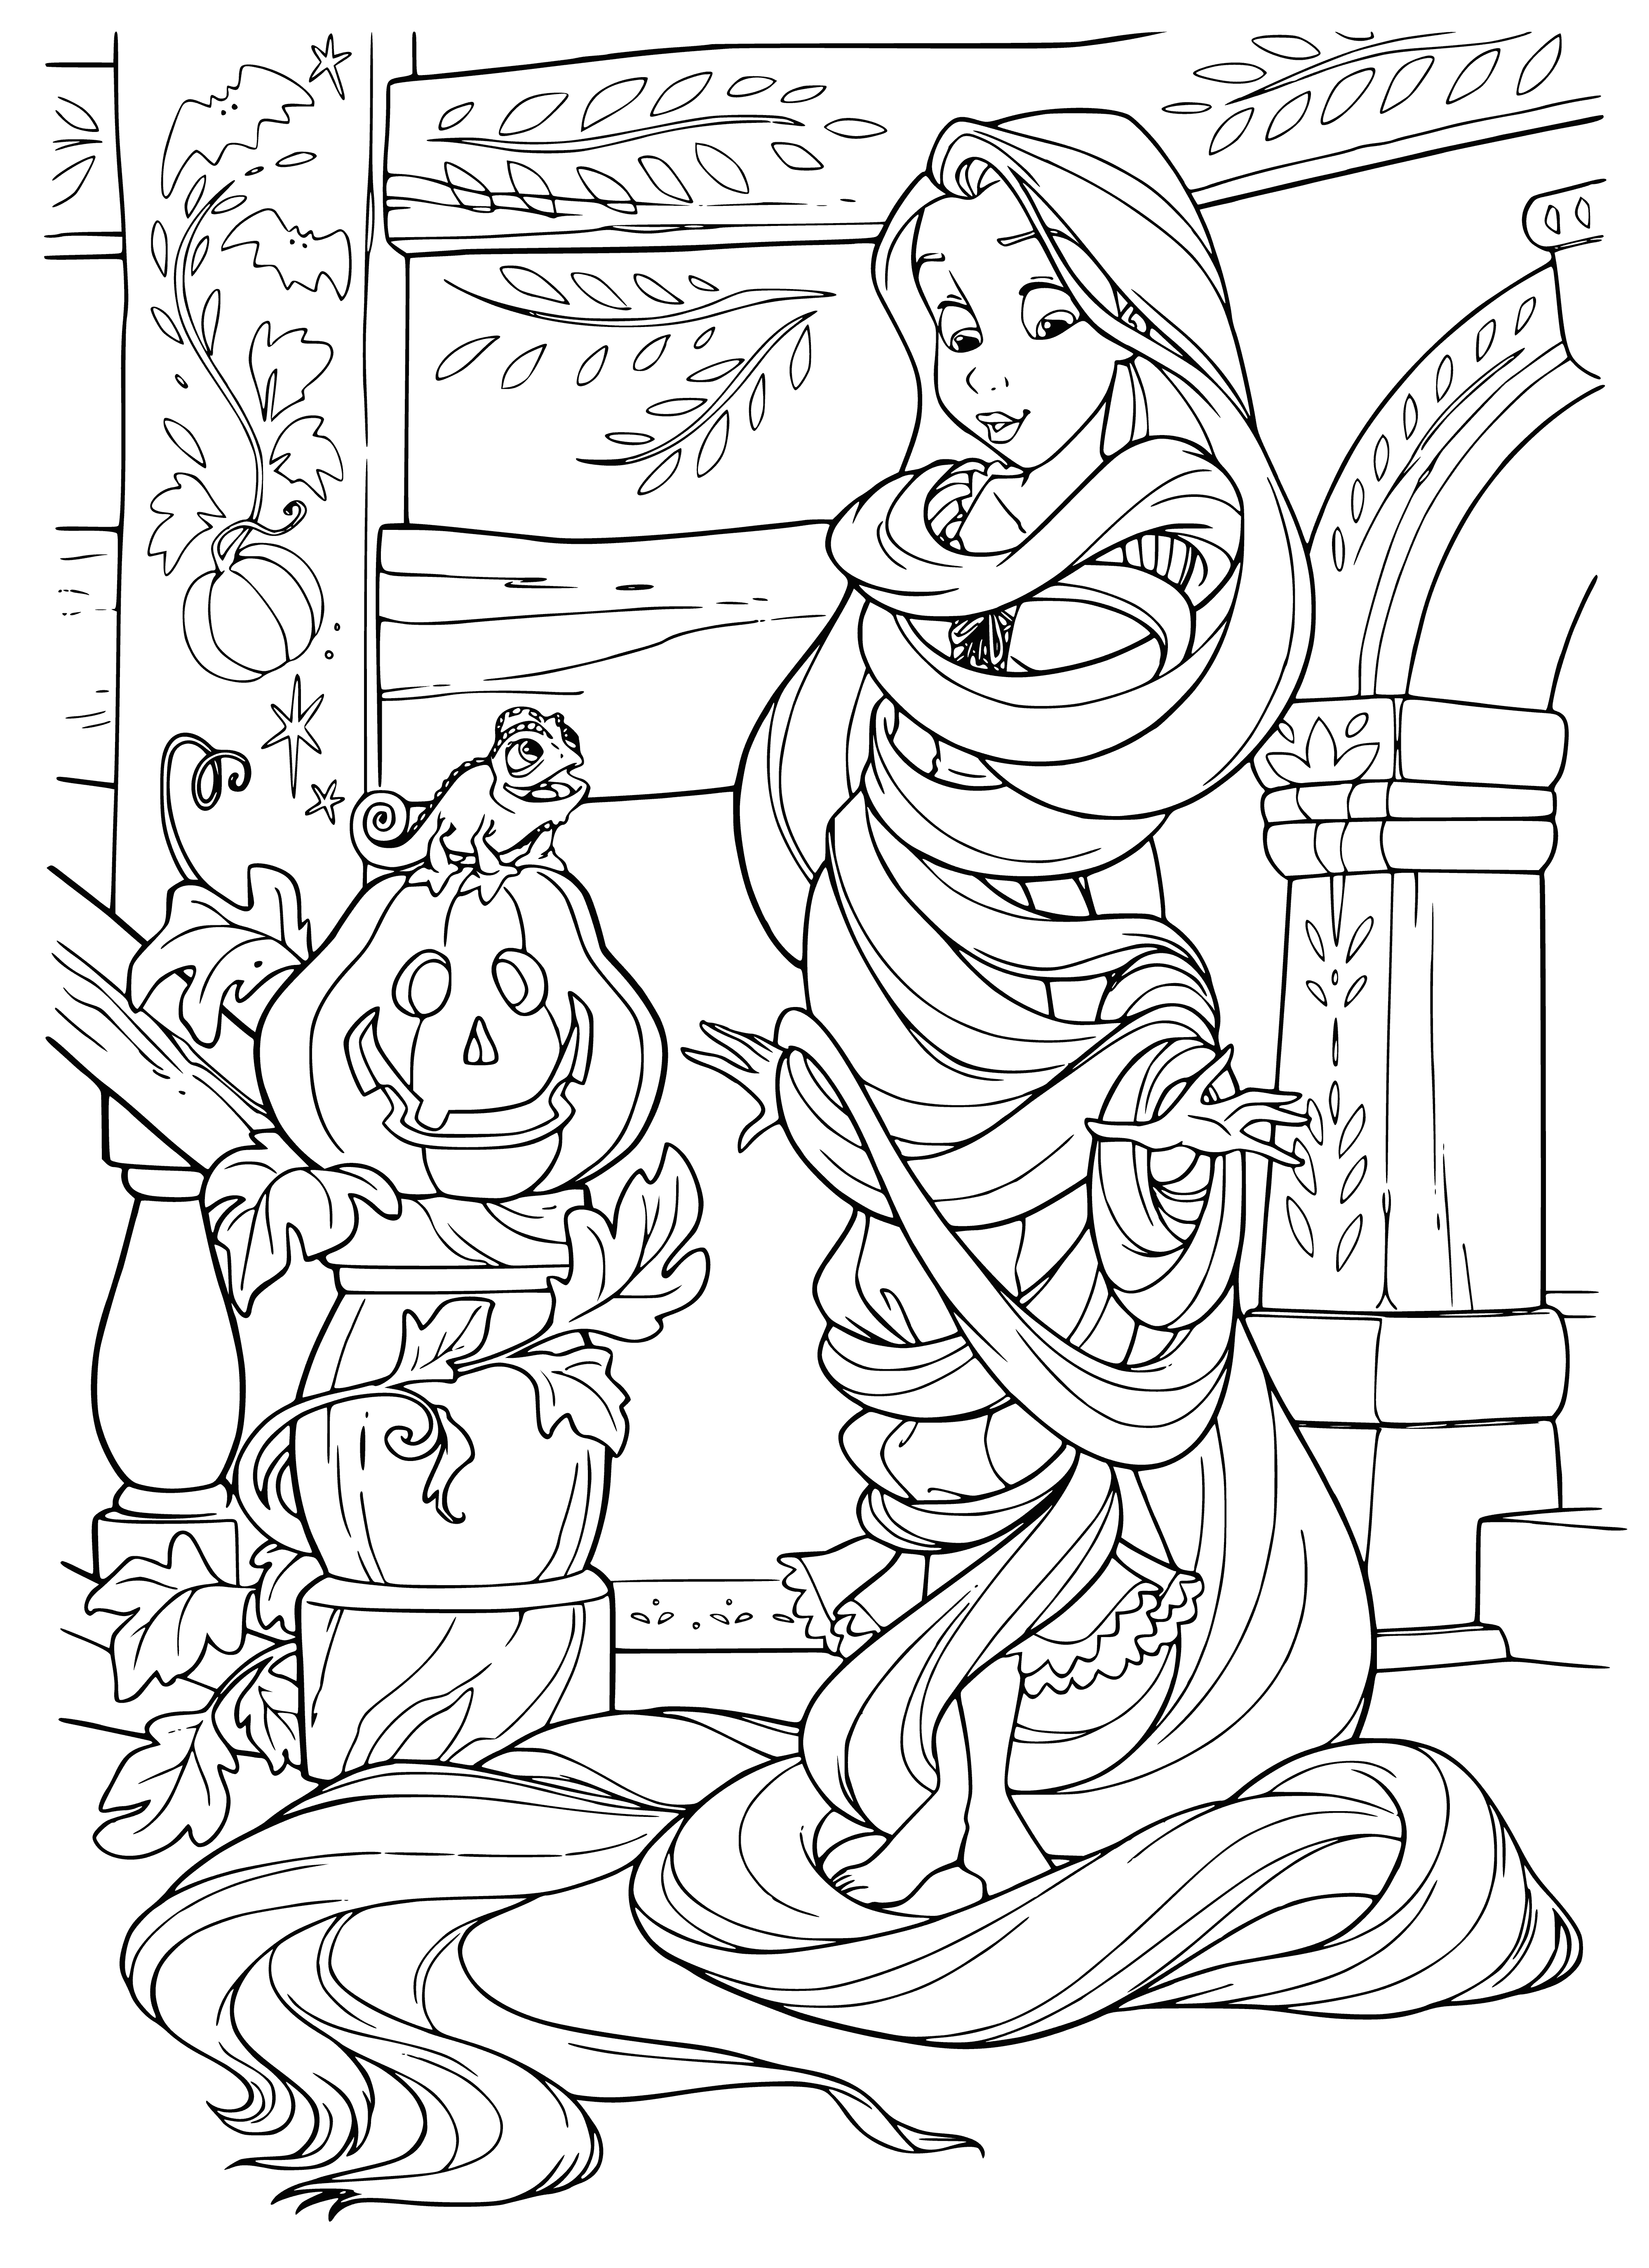 coloring page: Rapunzel dresses up in a pink & purple dress w/ white cape & pink bow for Halloween & holds a pumpkin. #Halloween #DisneyPrincess